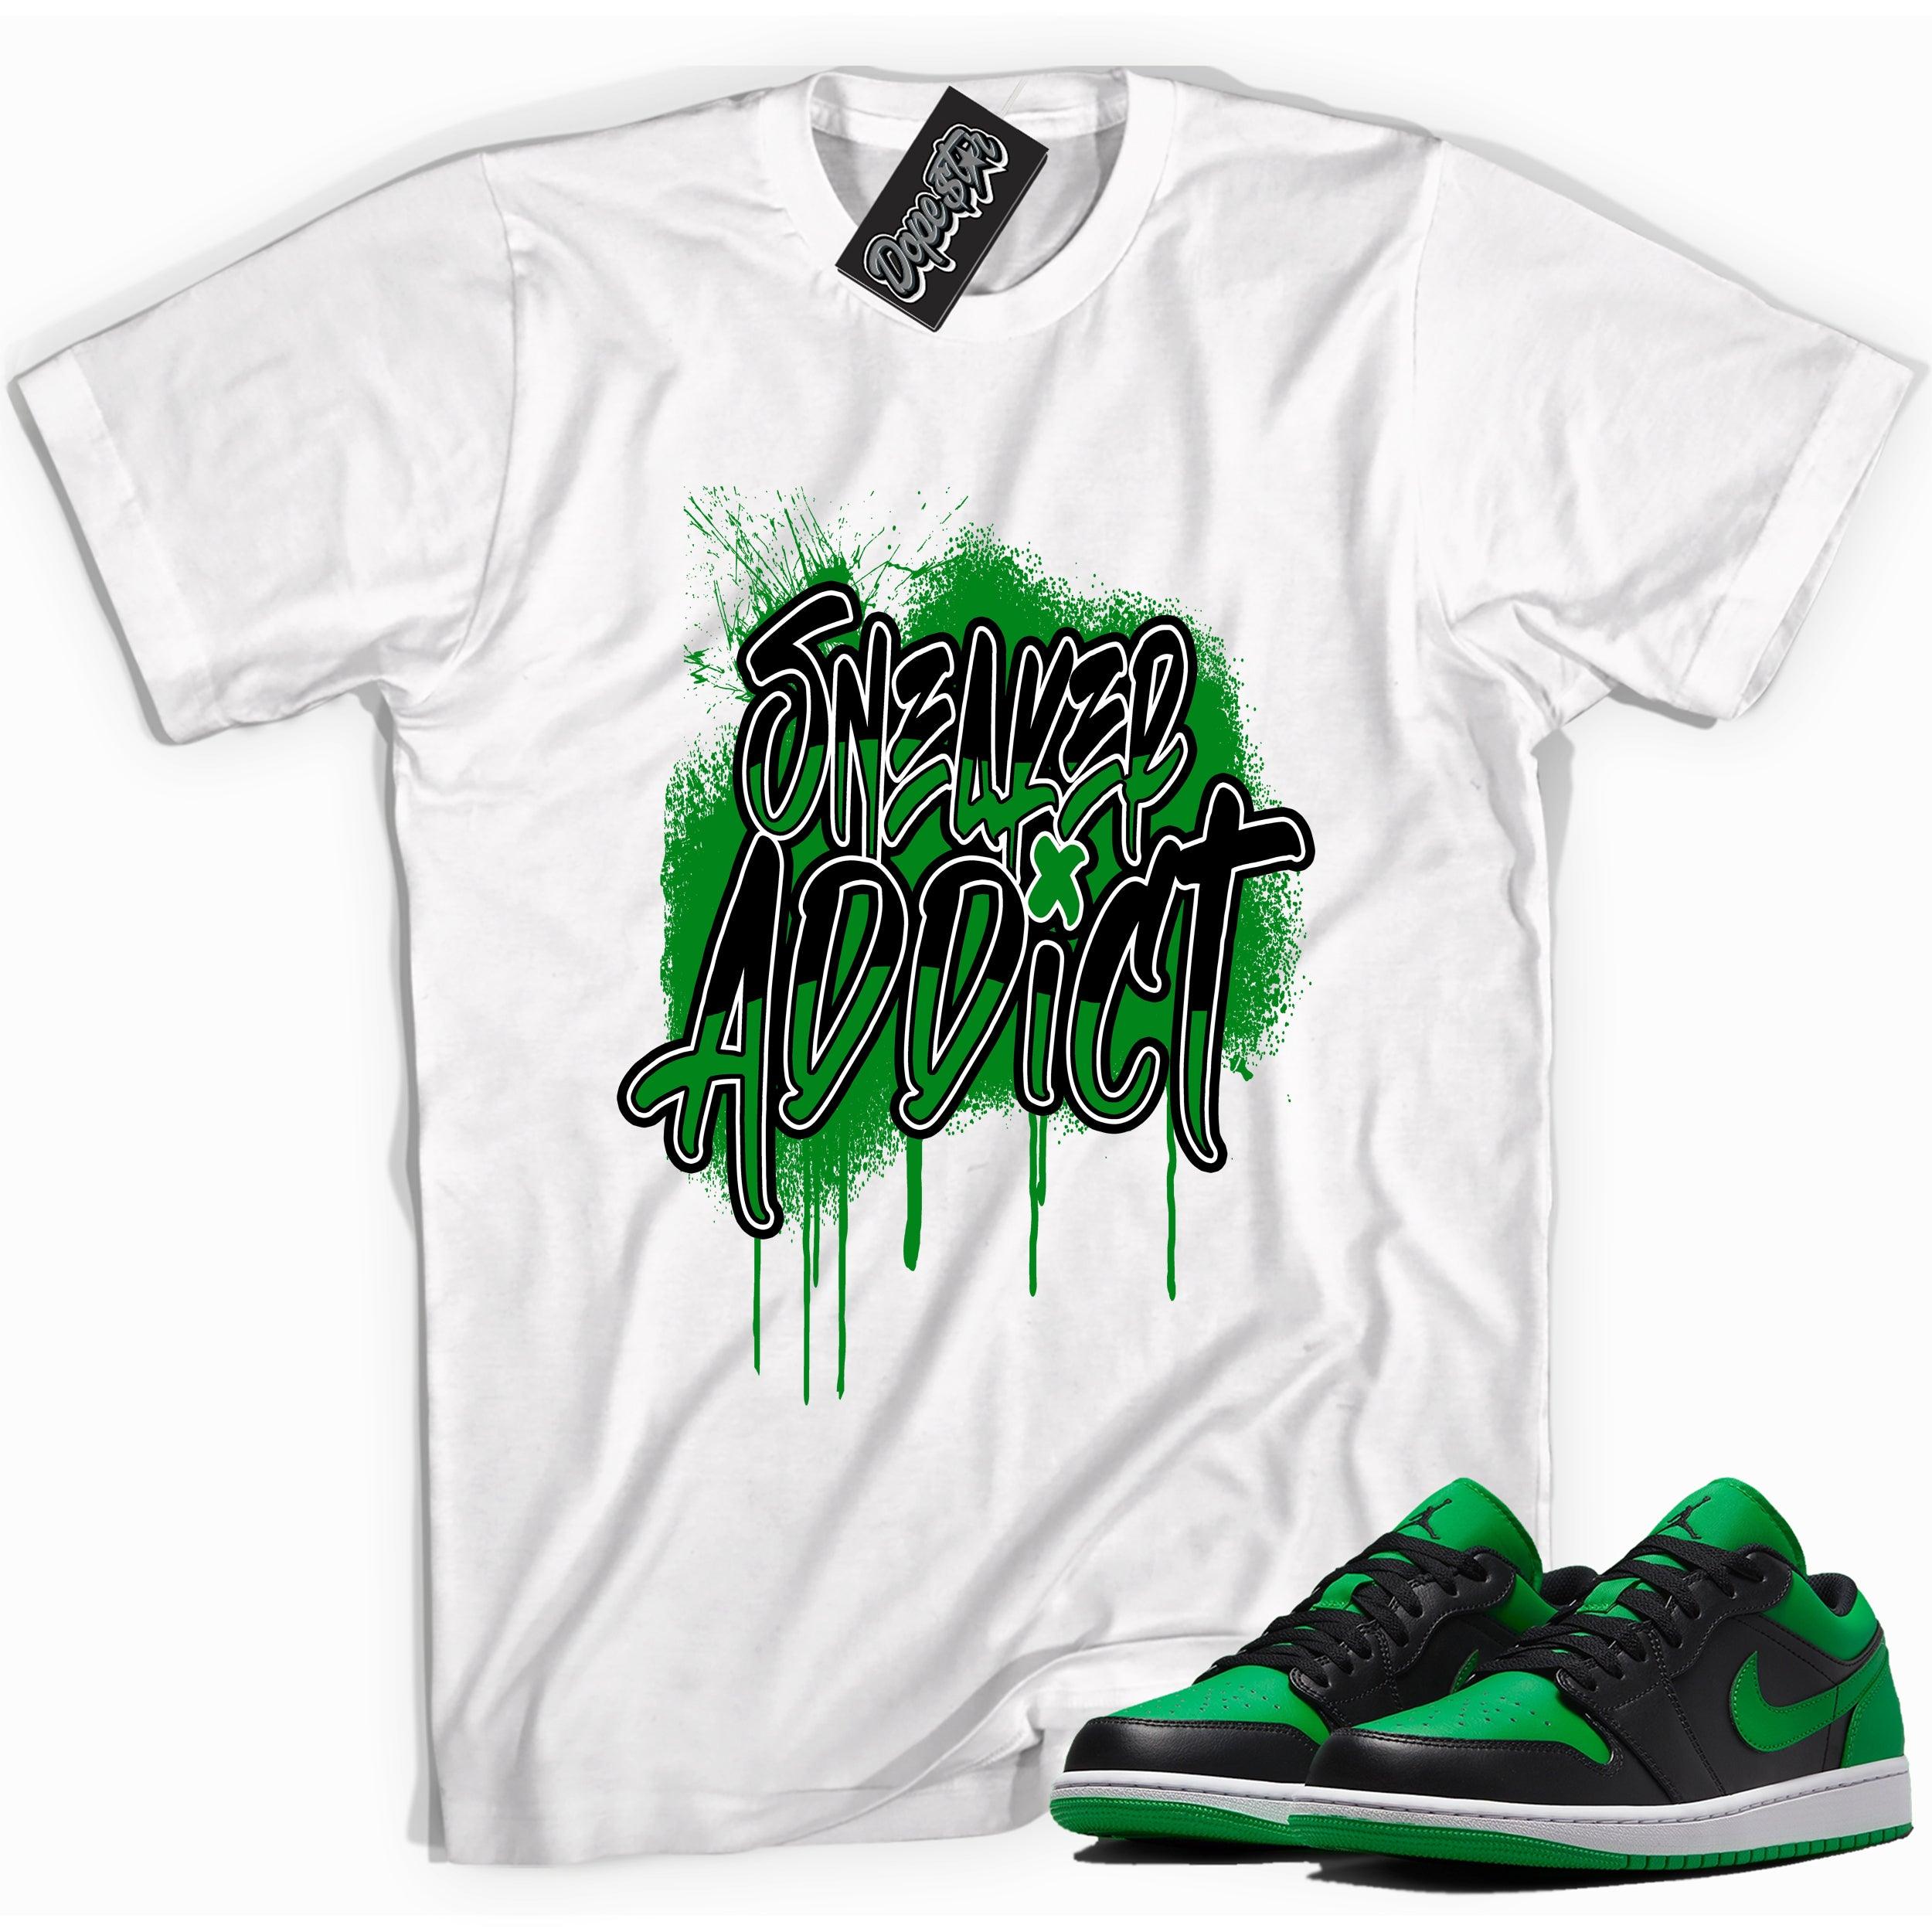 Cool white graphic tee with 'sneaker addict' print, that perfectly matches Air Jordan 1 Low Lucky Green sneakers